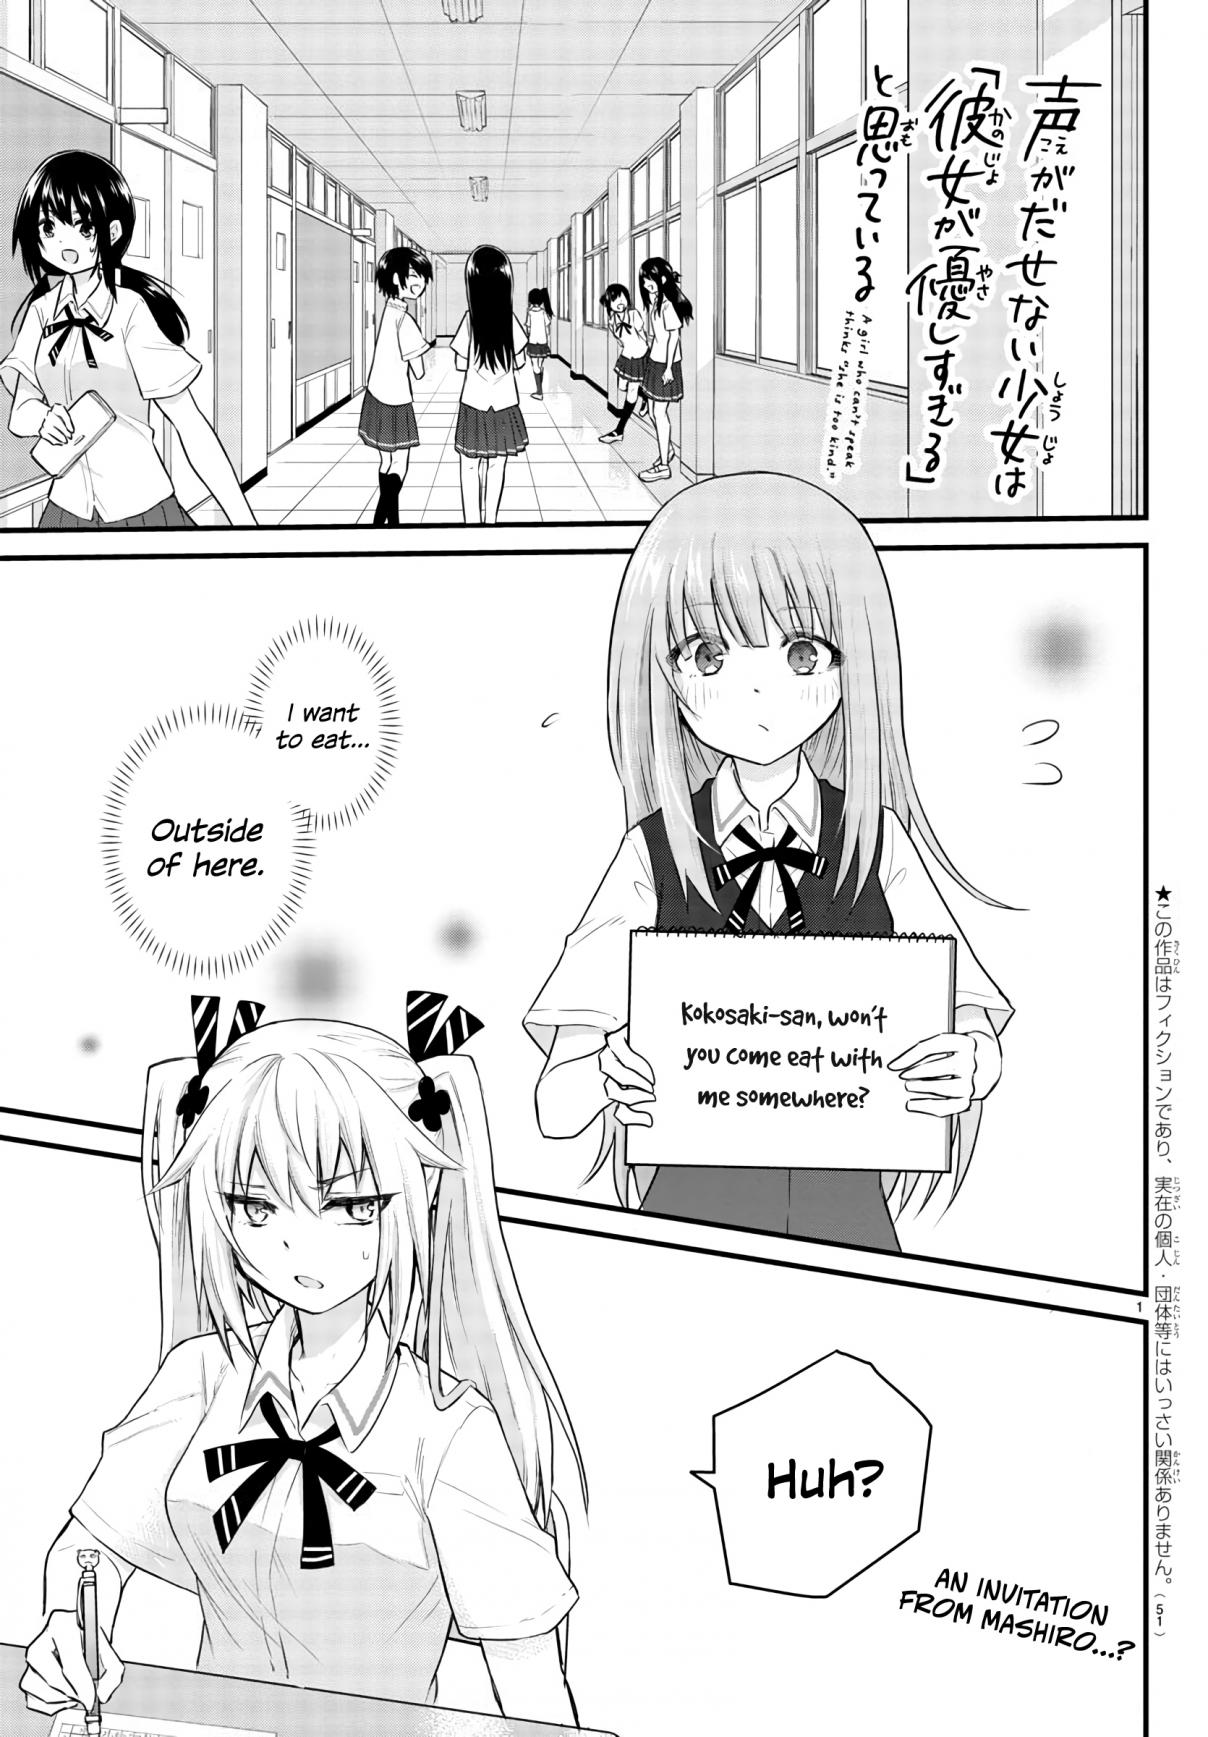 A Girl Who Can't Speak Thinks "She Is Too Kind." Vol. 1 Ch. 5 Lunch Break